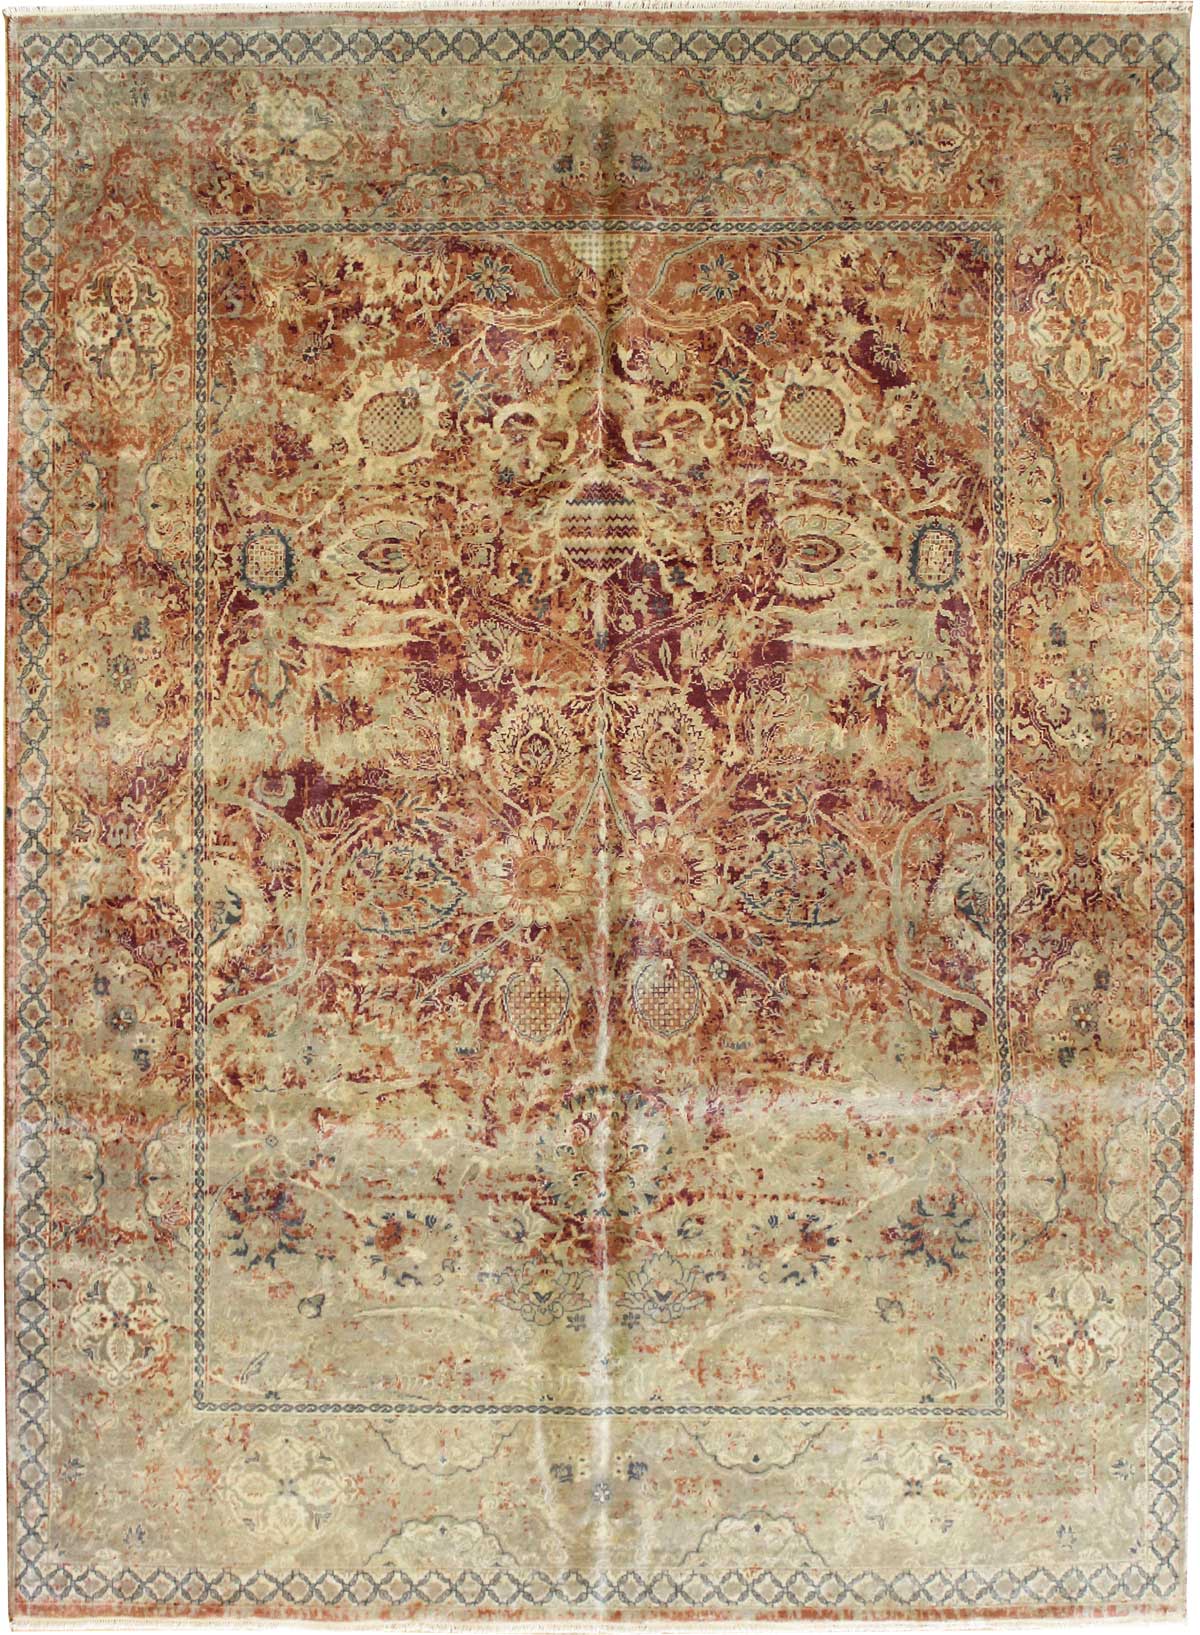 Erased Look Handwoven Transitional Rug